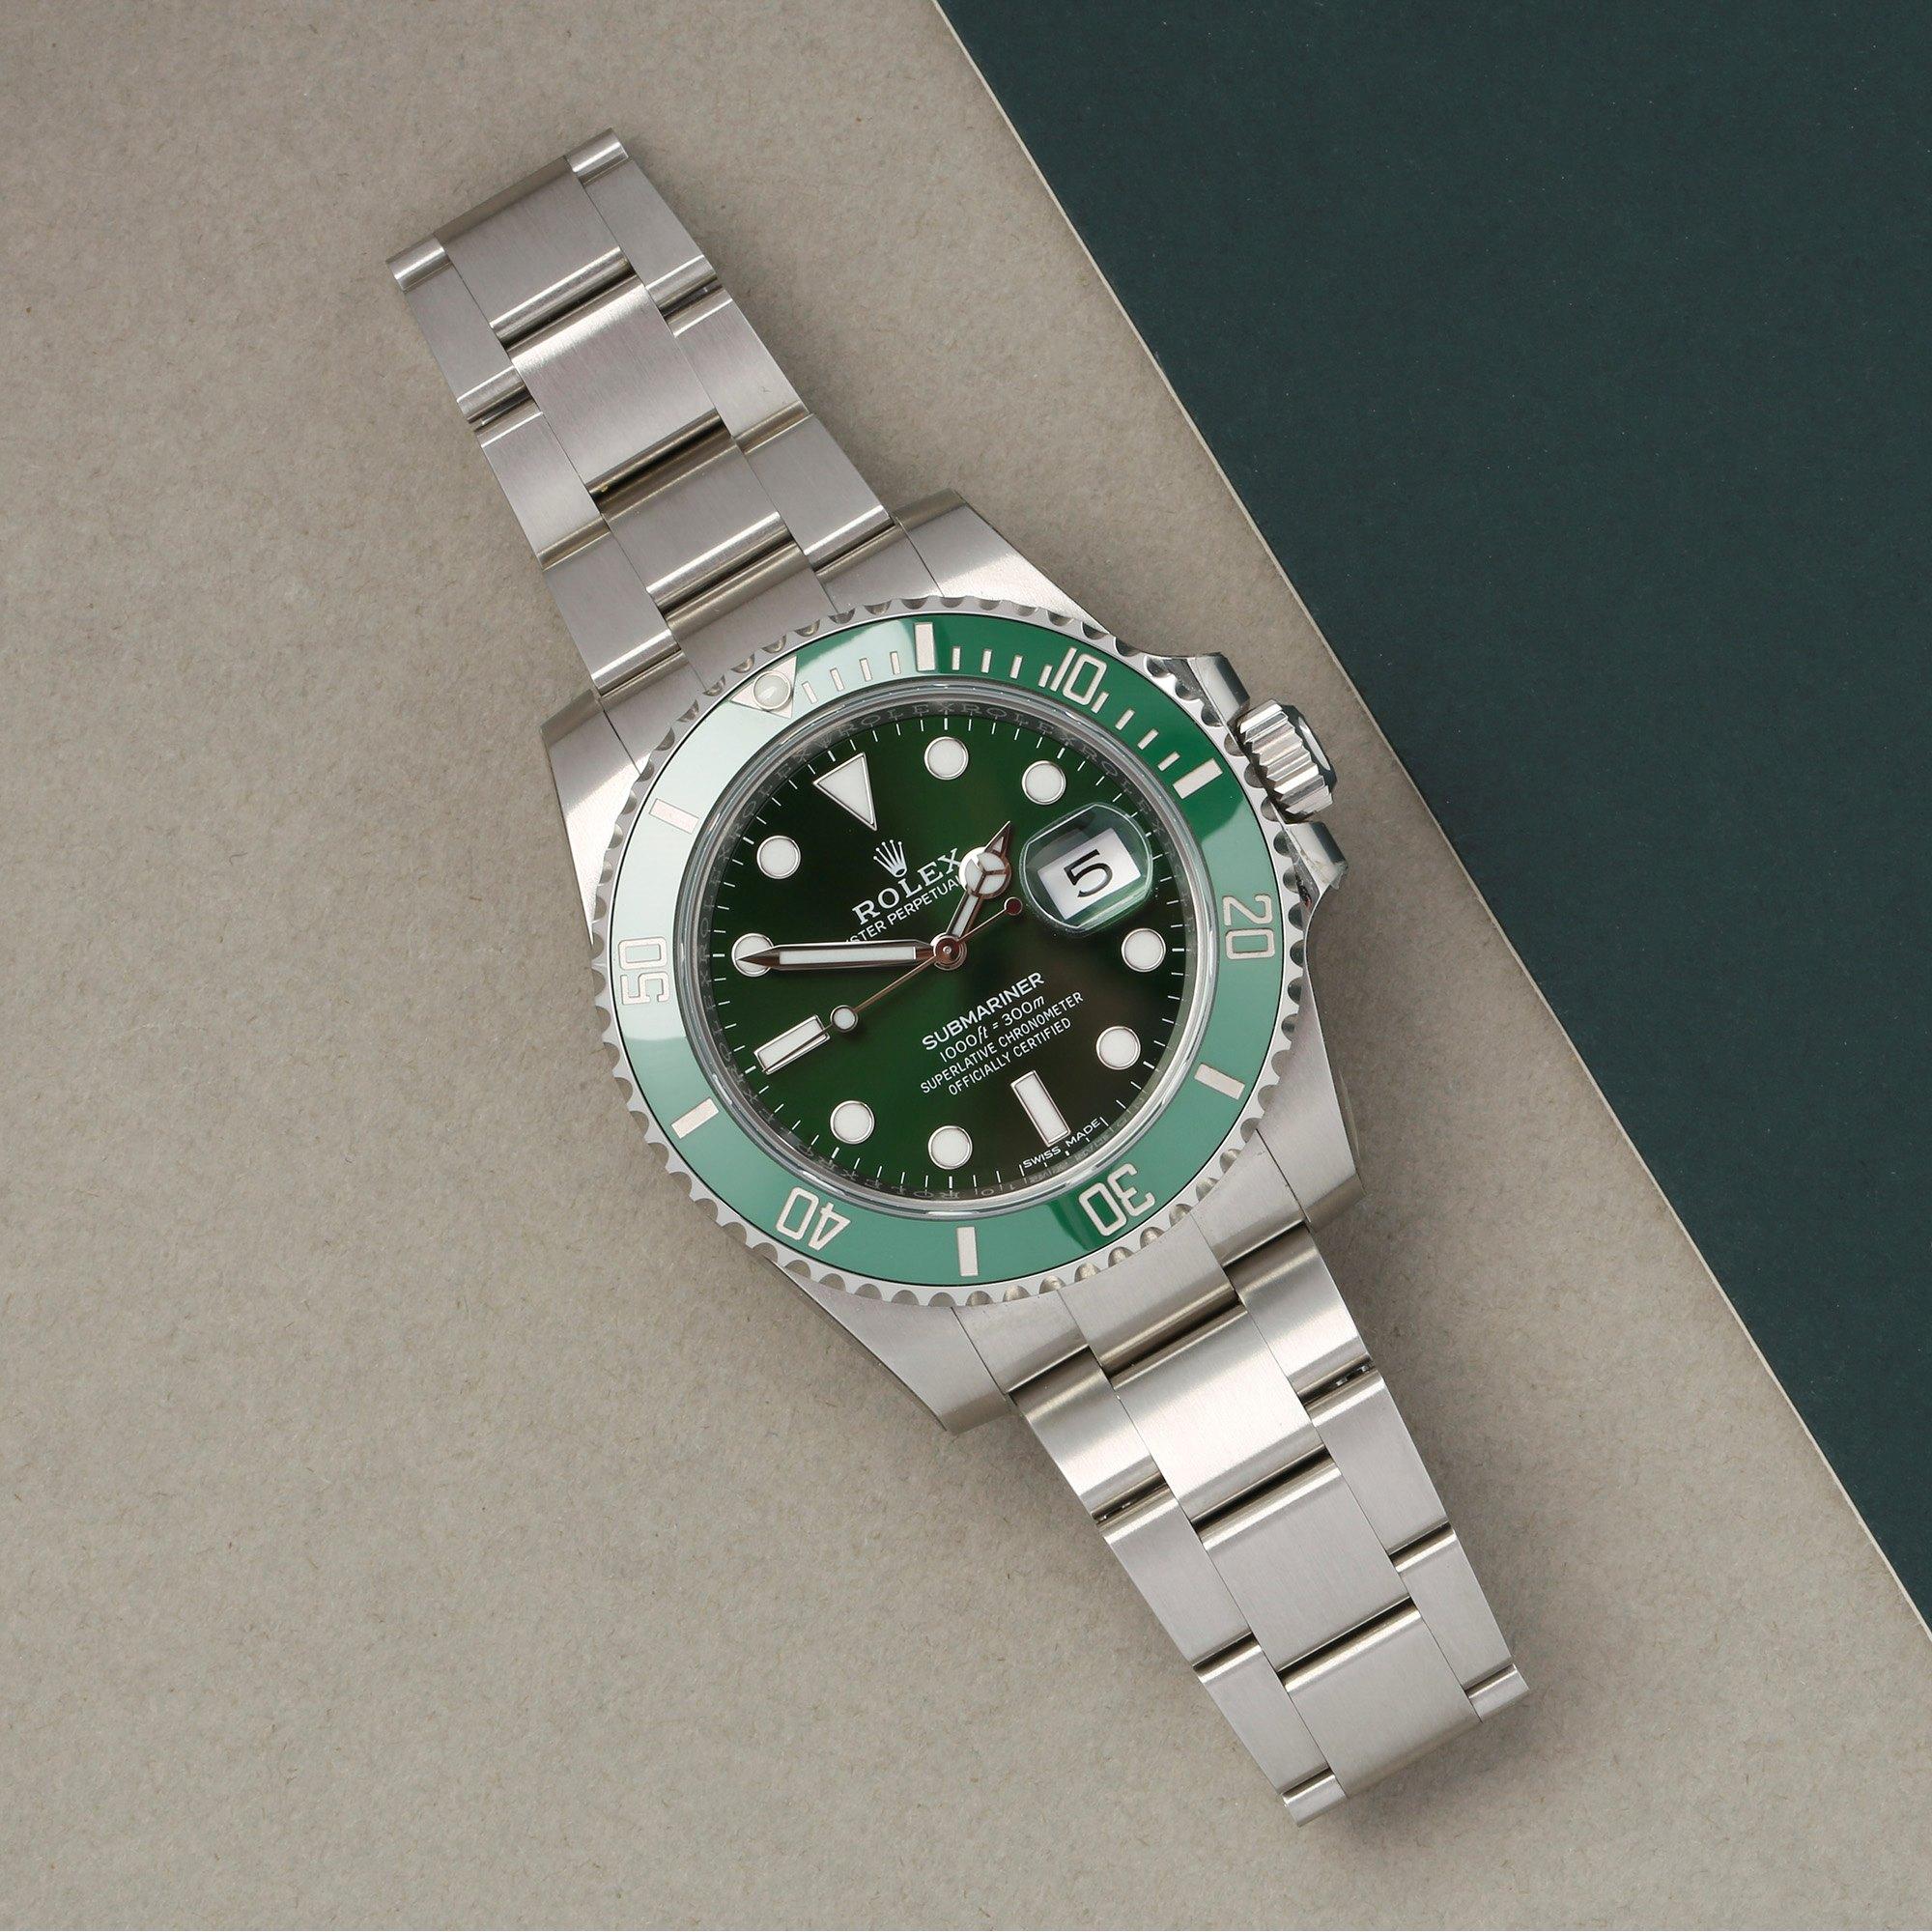 Xupes Reference: COM002773
Manufacturer: Rolex
Model: Submariner
Model Variant: 0
Model Number: 116610LV
Age: 22-12-2017
Gender: Men
Complete With: Rolex Box, Manuals, Guarantee, Hand Tag, Card Holder & Guarantee Card 
Dial: Green Baton
Glass: